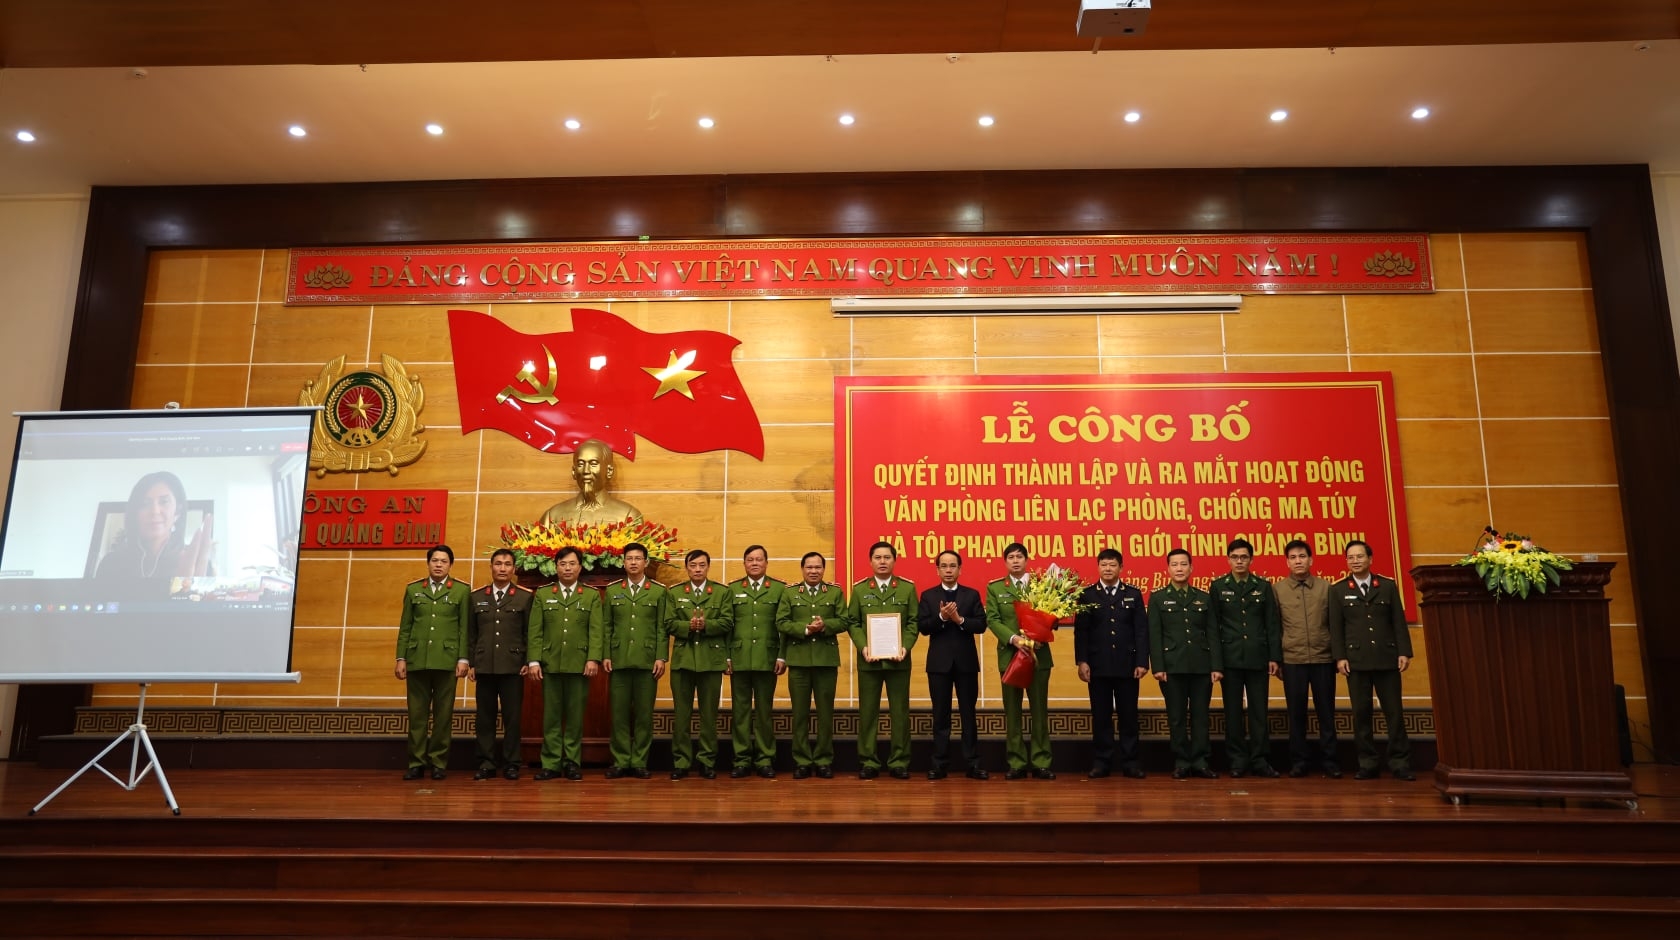 UNODC Border Liaison Office opens in Quang Binh